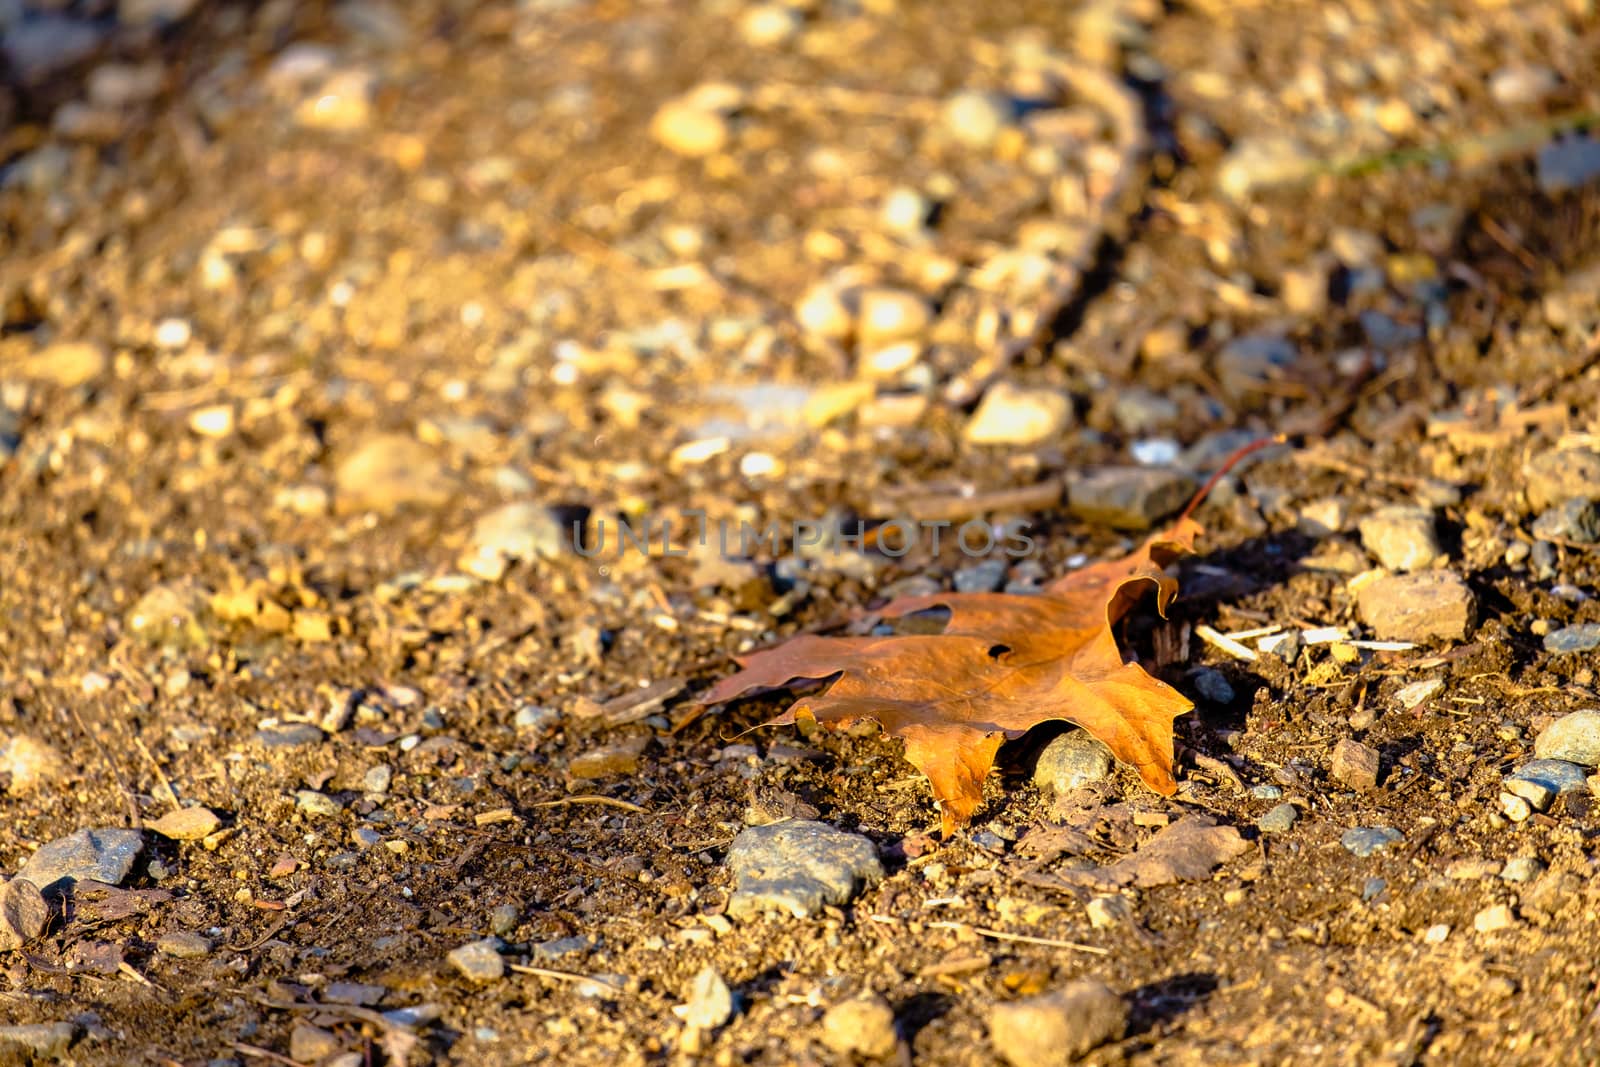 A fallen, dried and damaged leaf lies on the ground among stones and dirt.